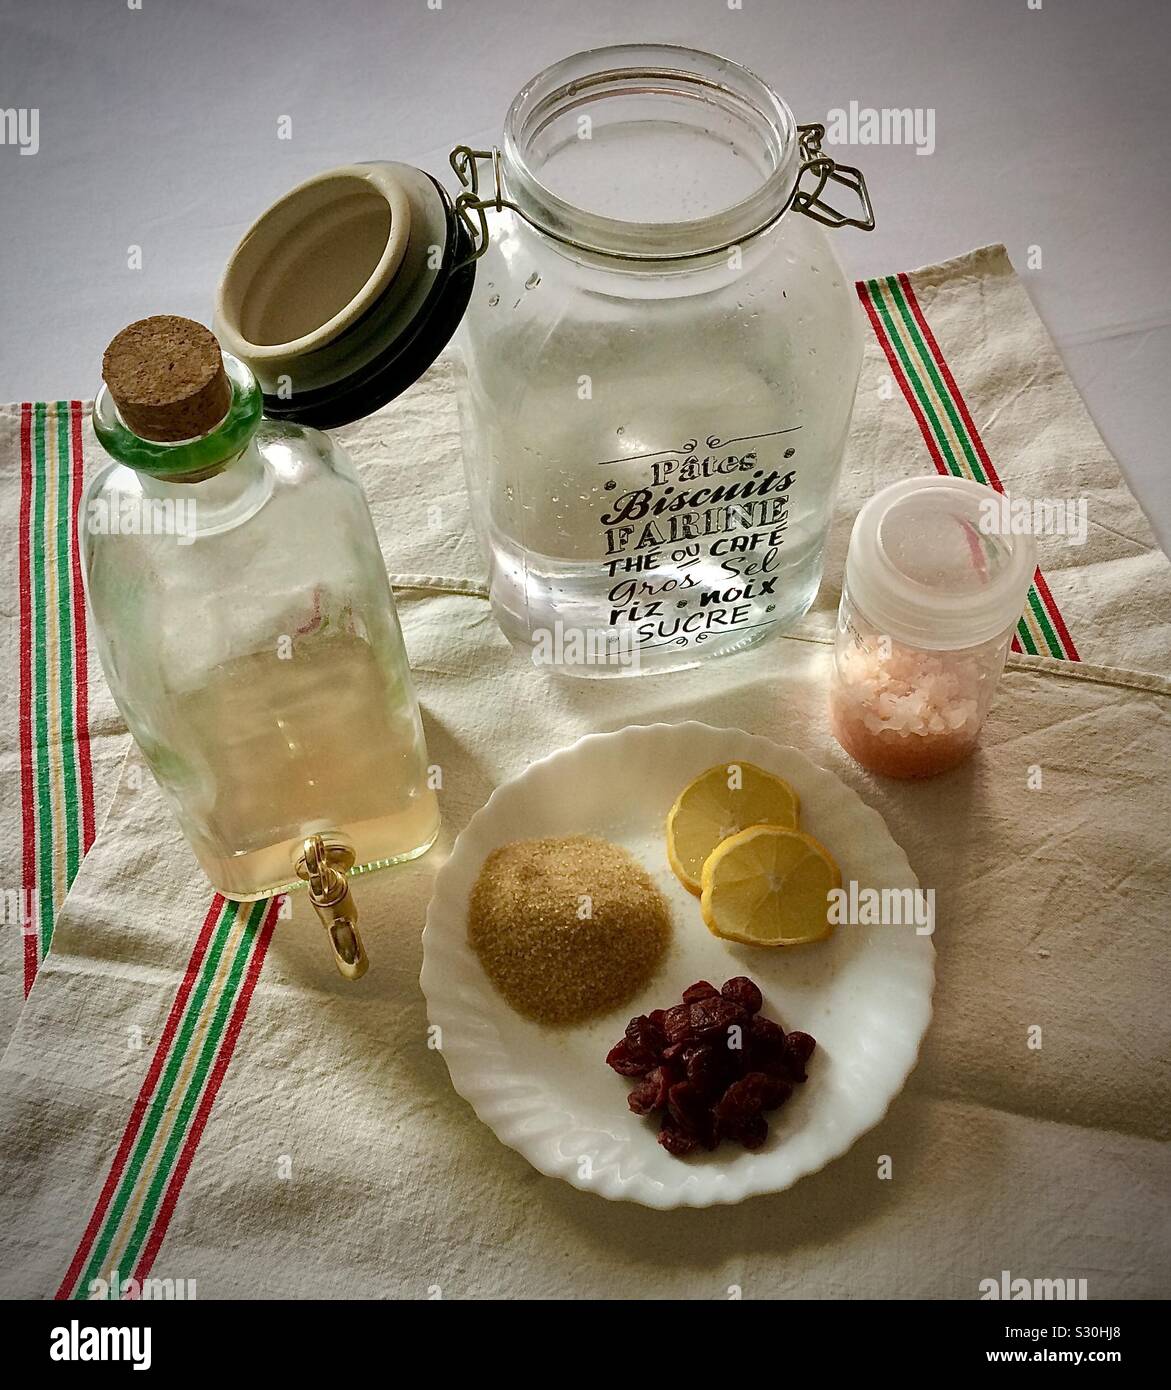 Ingredients for making the healthy kefir drink. Stock Photo